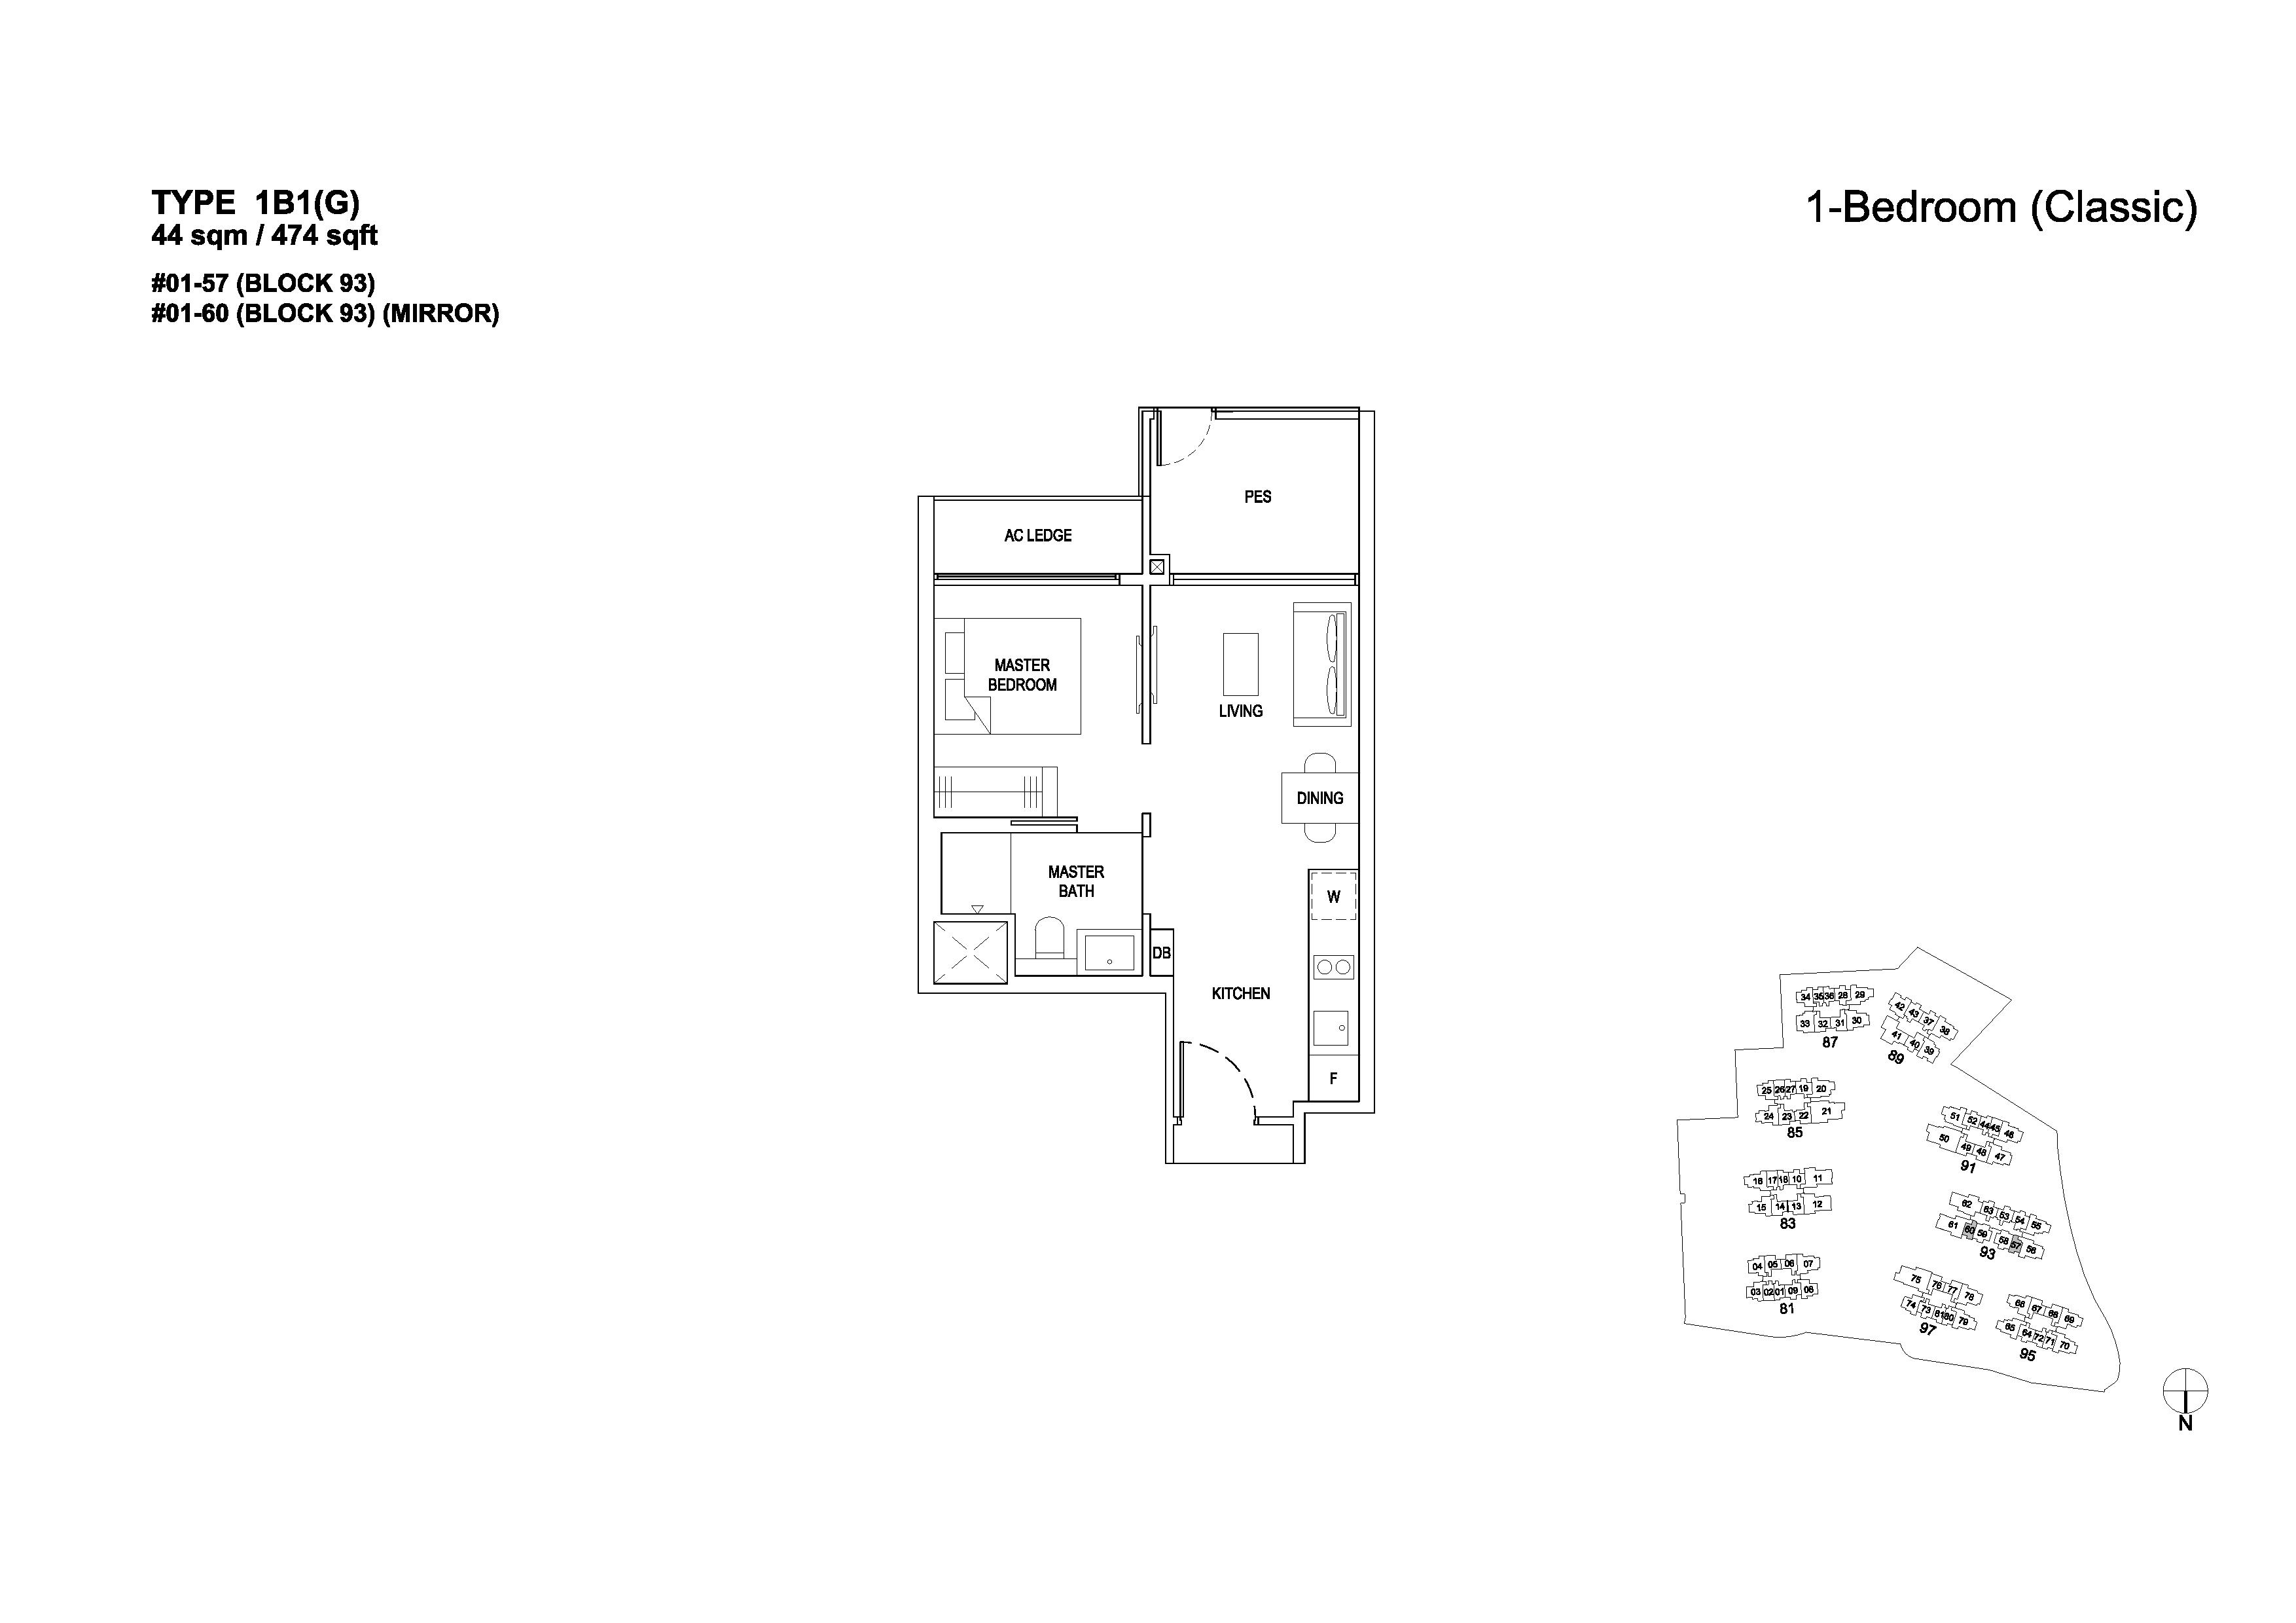 The Florence Residences 1 Bedroom Classic Type 1B1G Floor Plans